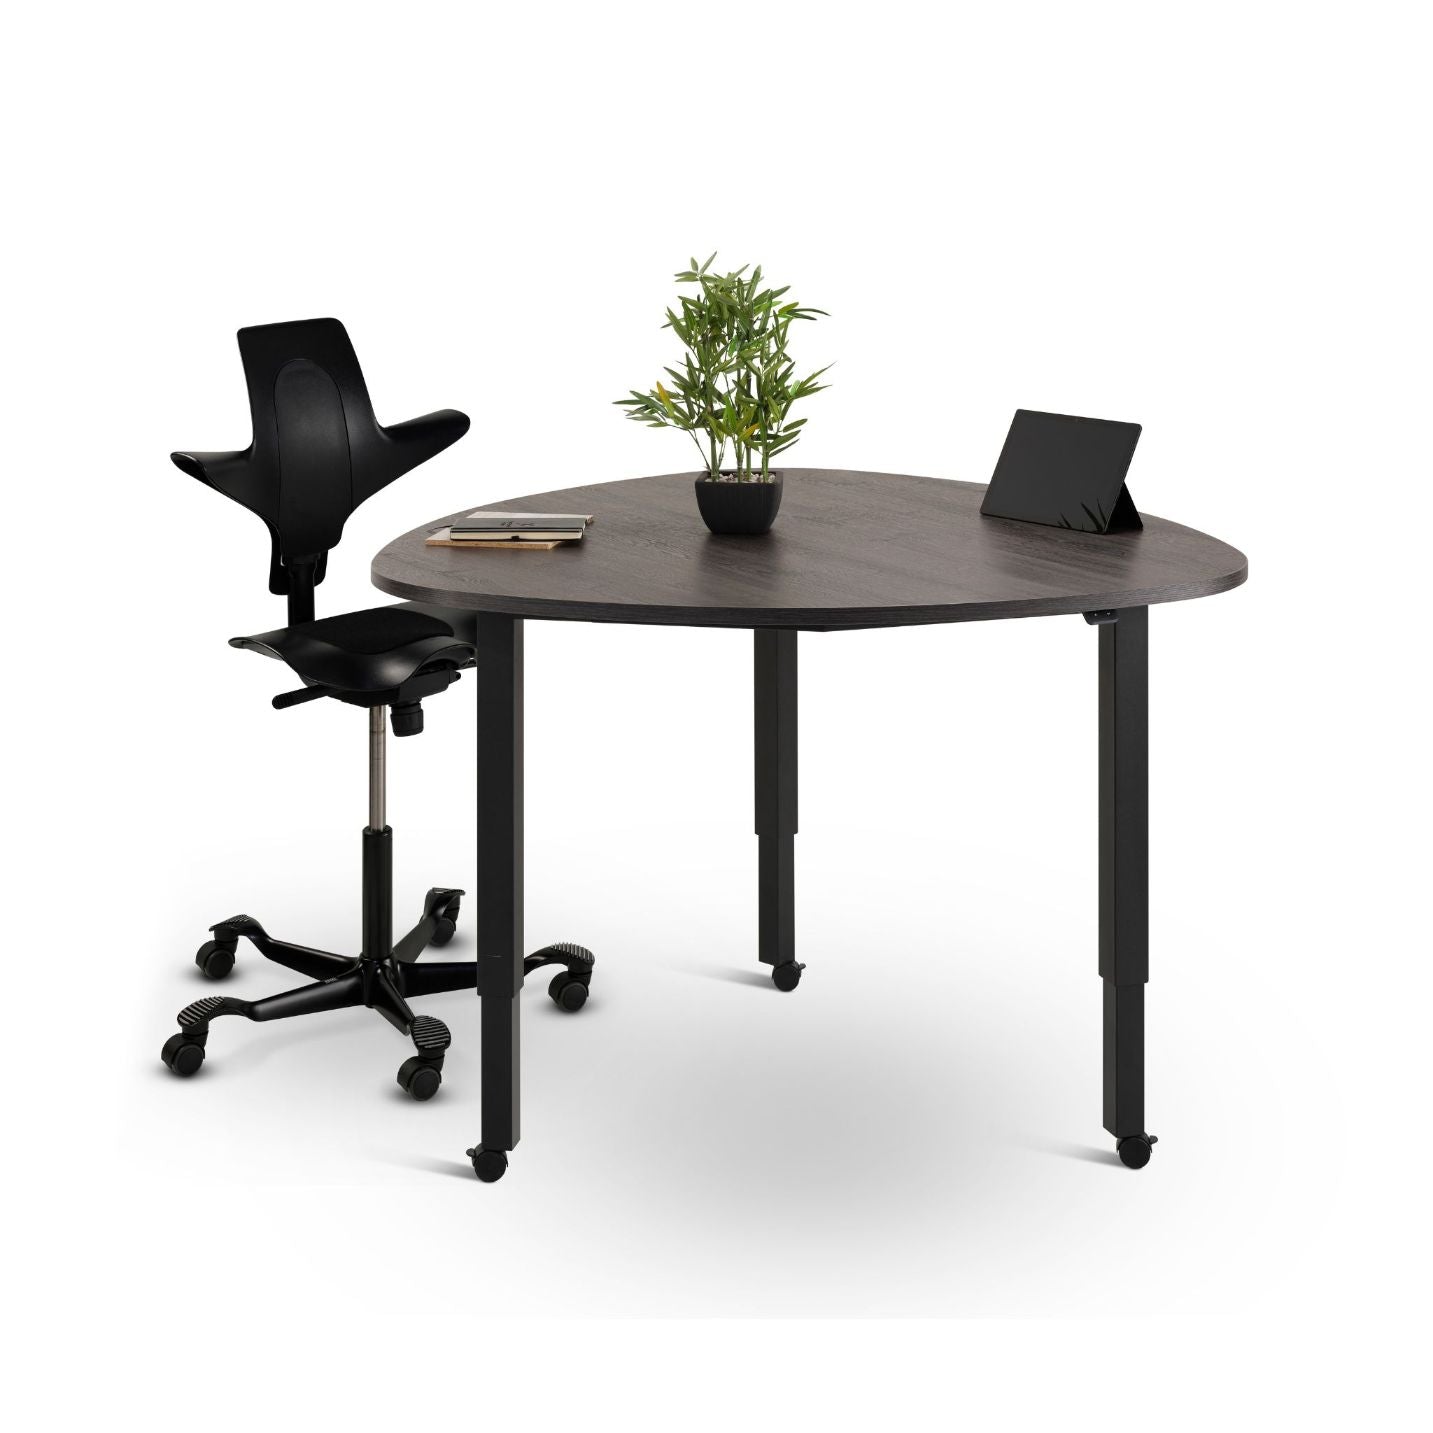 Huddle office meeting table